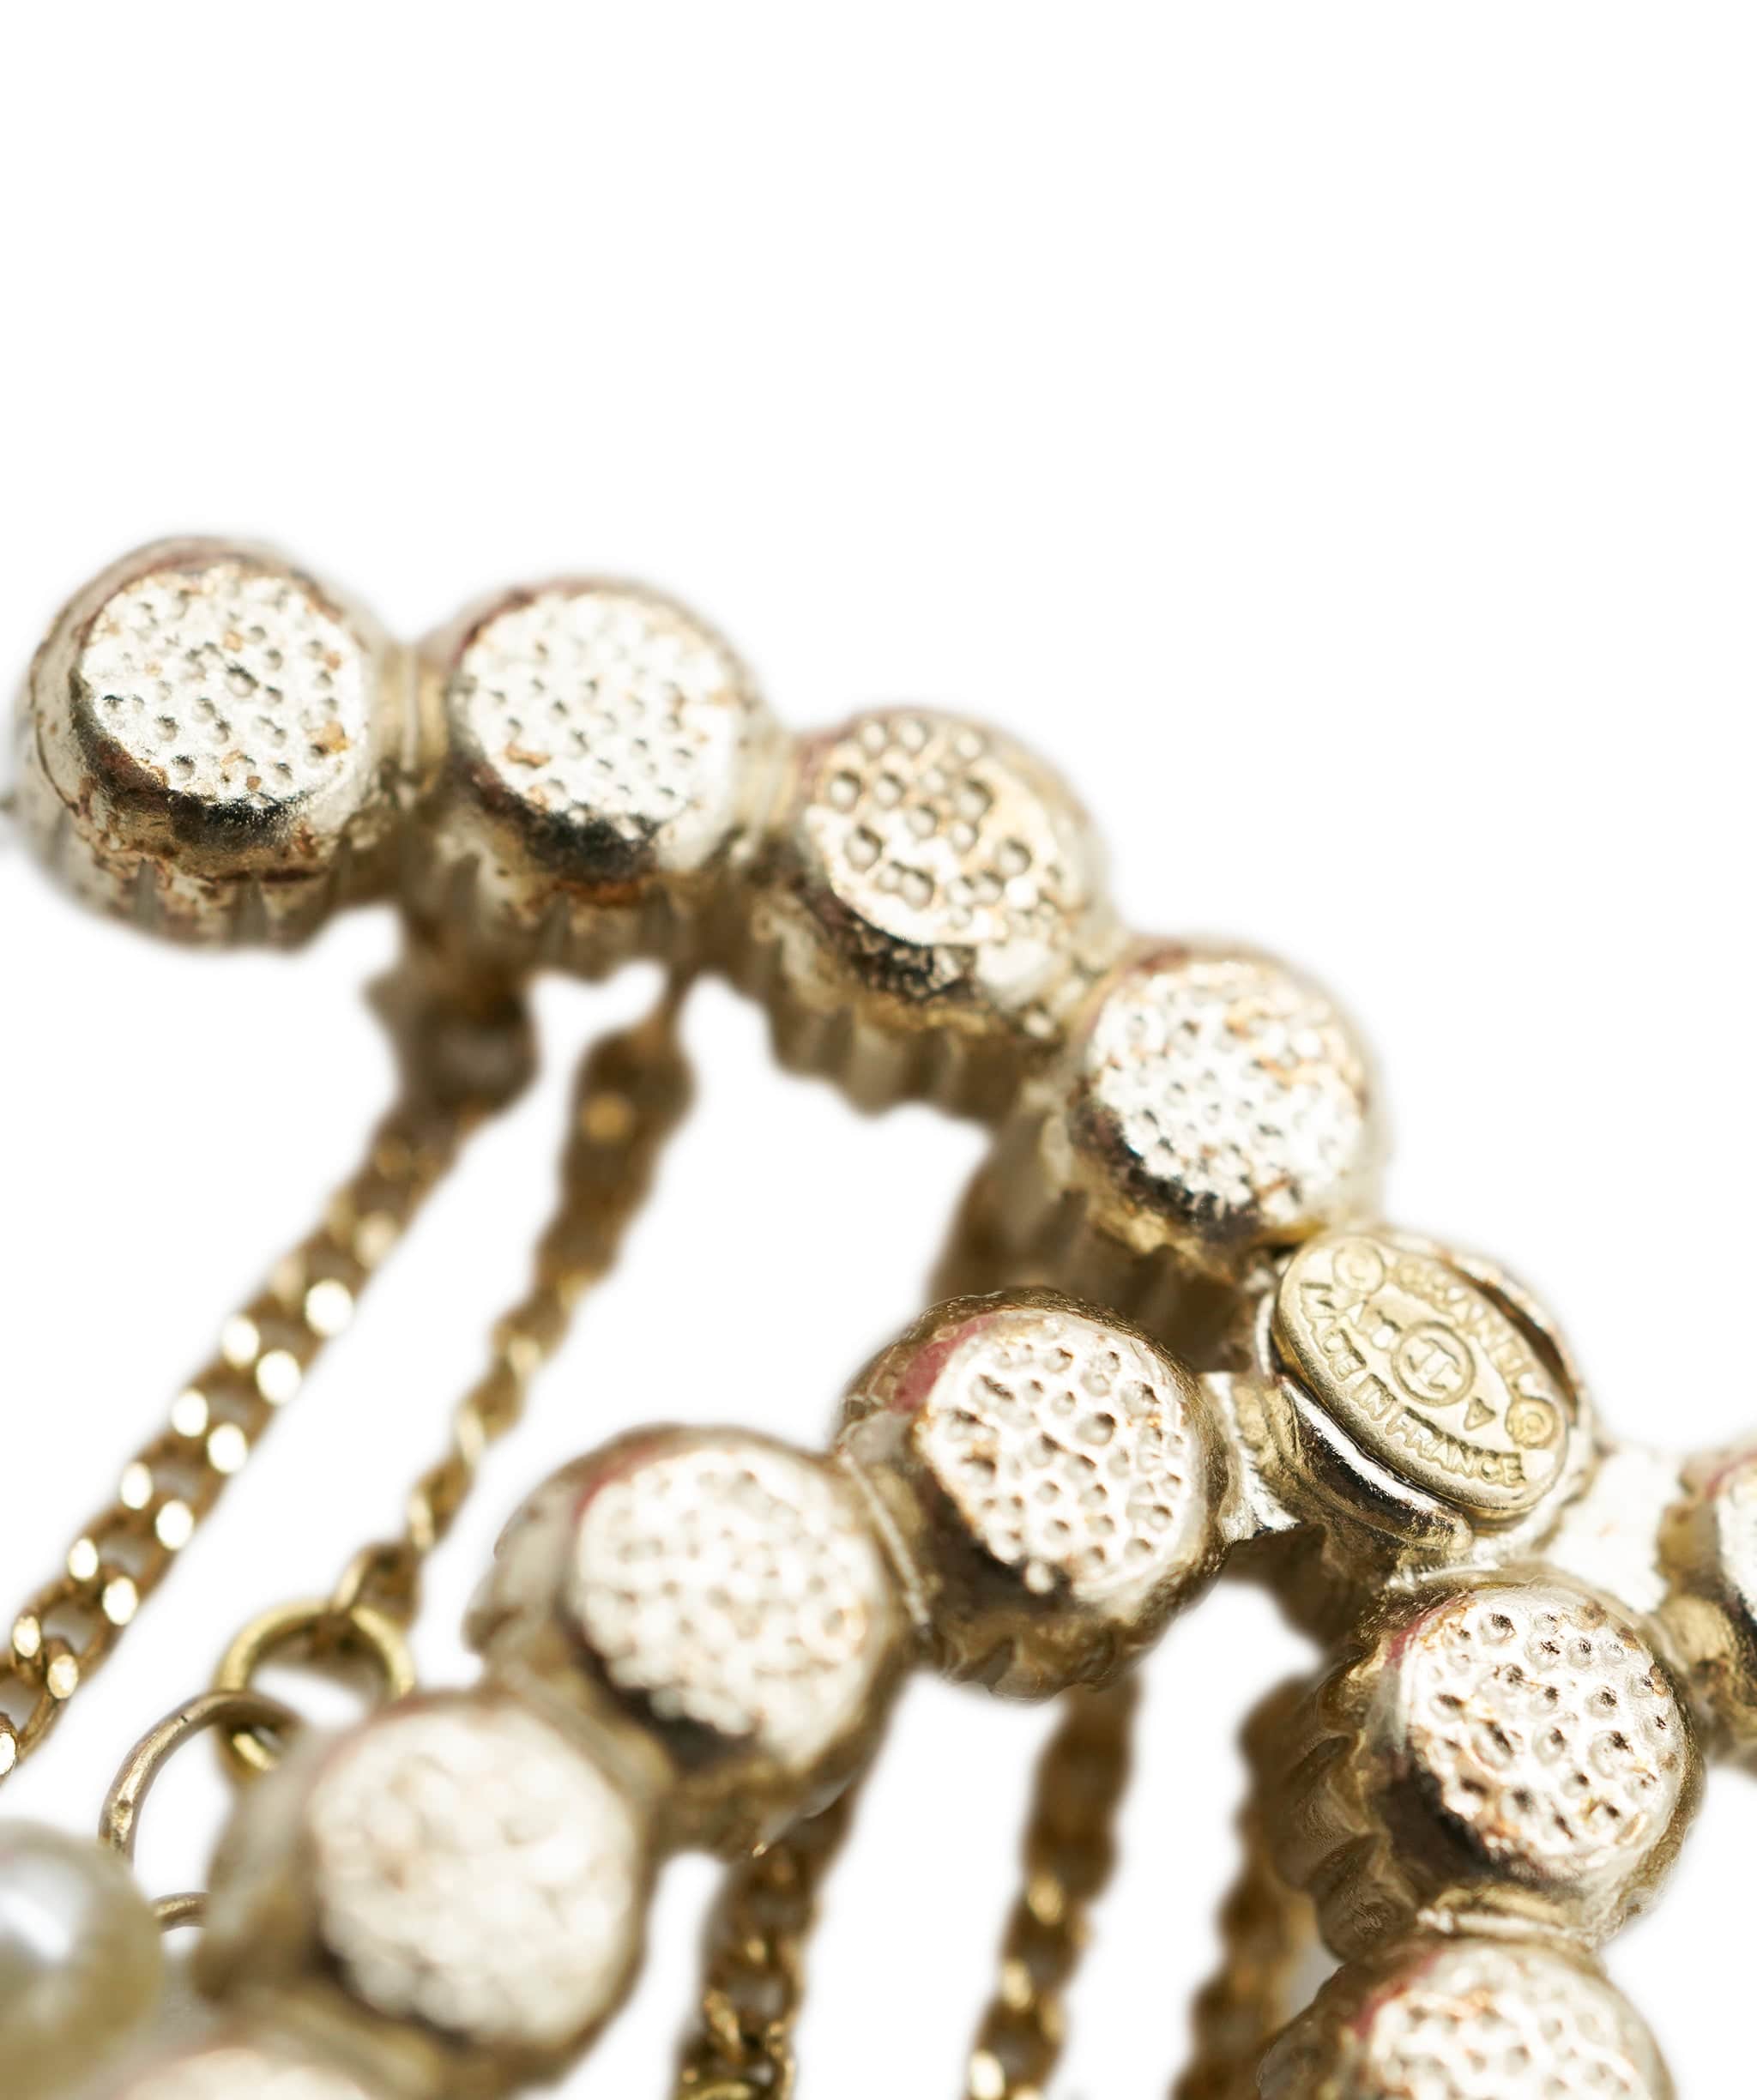 Chanel Chanel Pearl Chain Detail Champagne Gold Brooch ALL0648